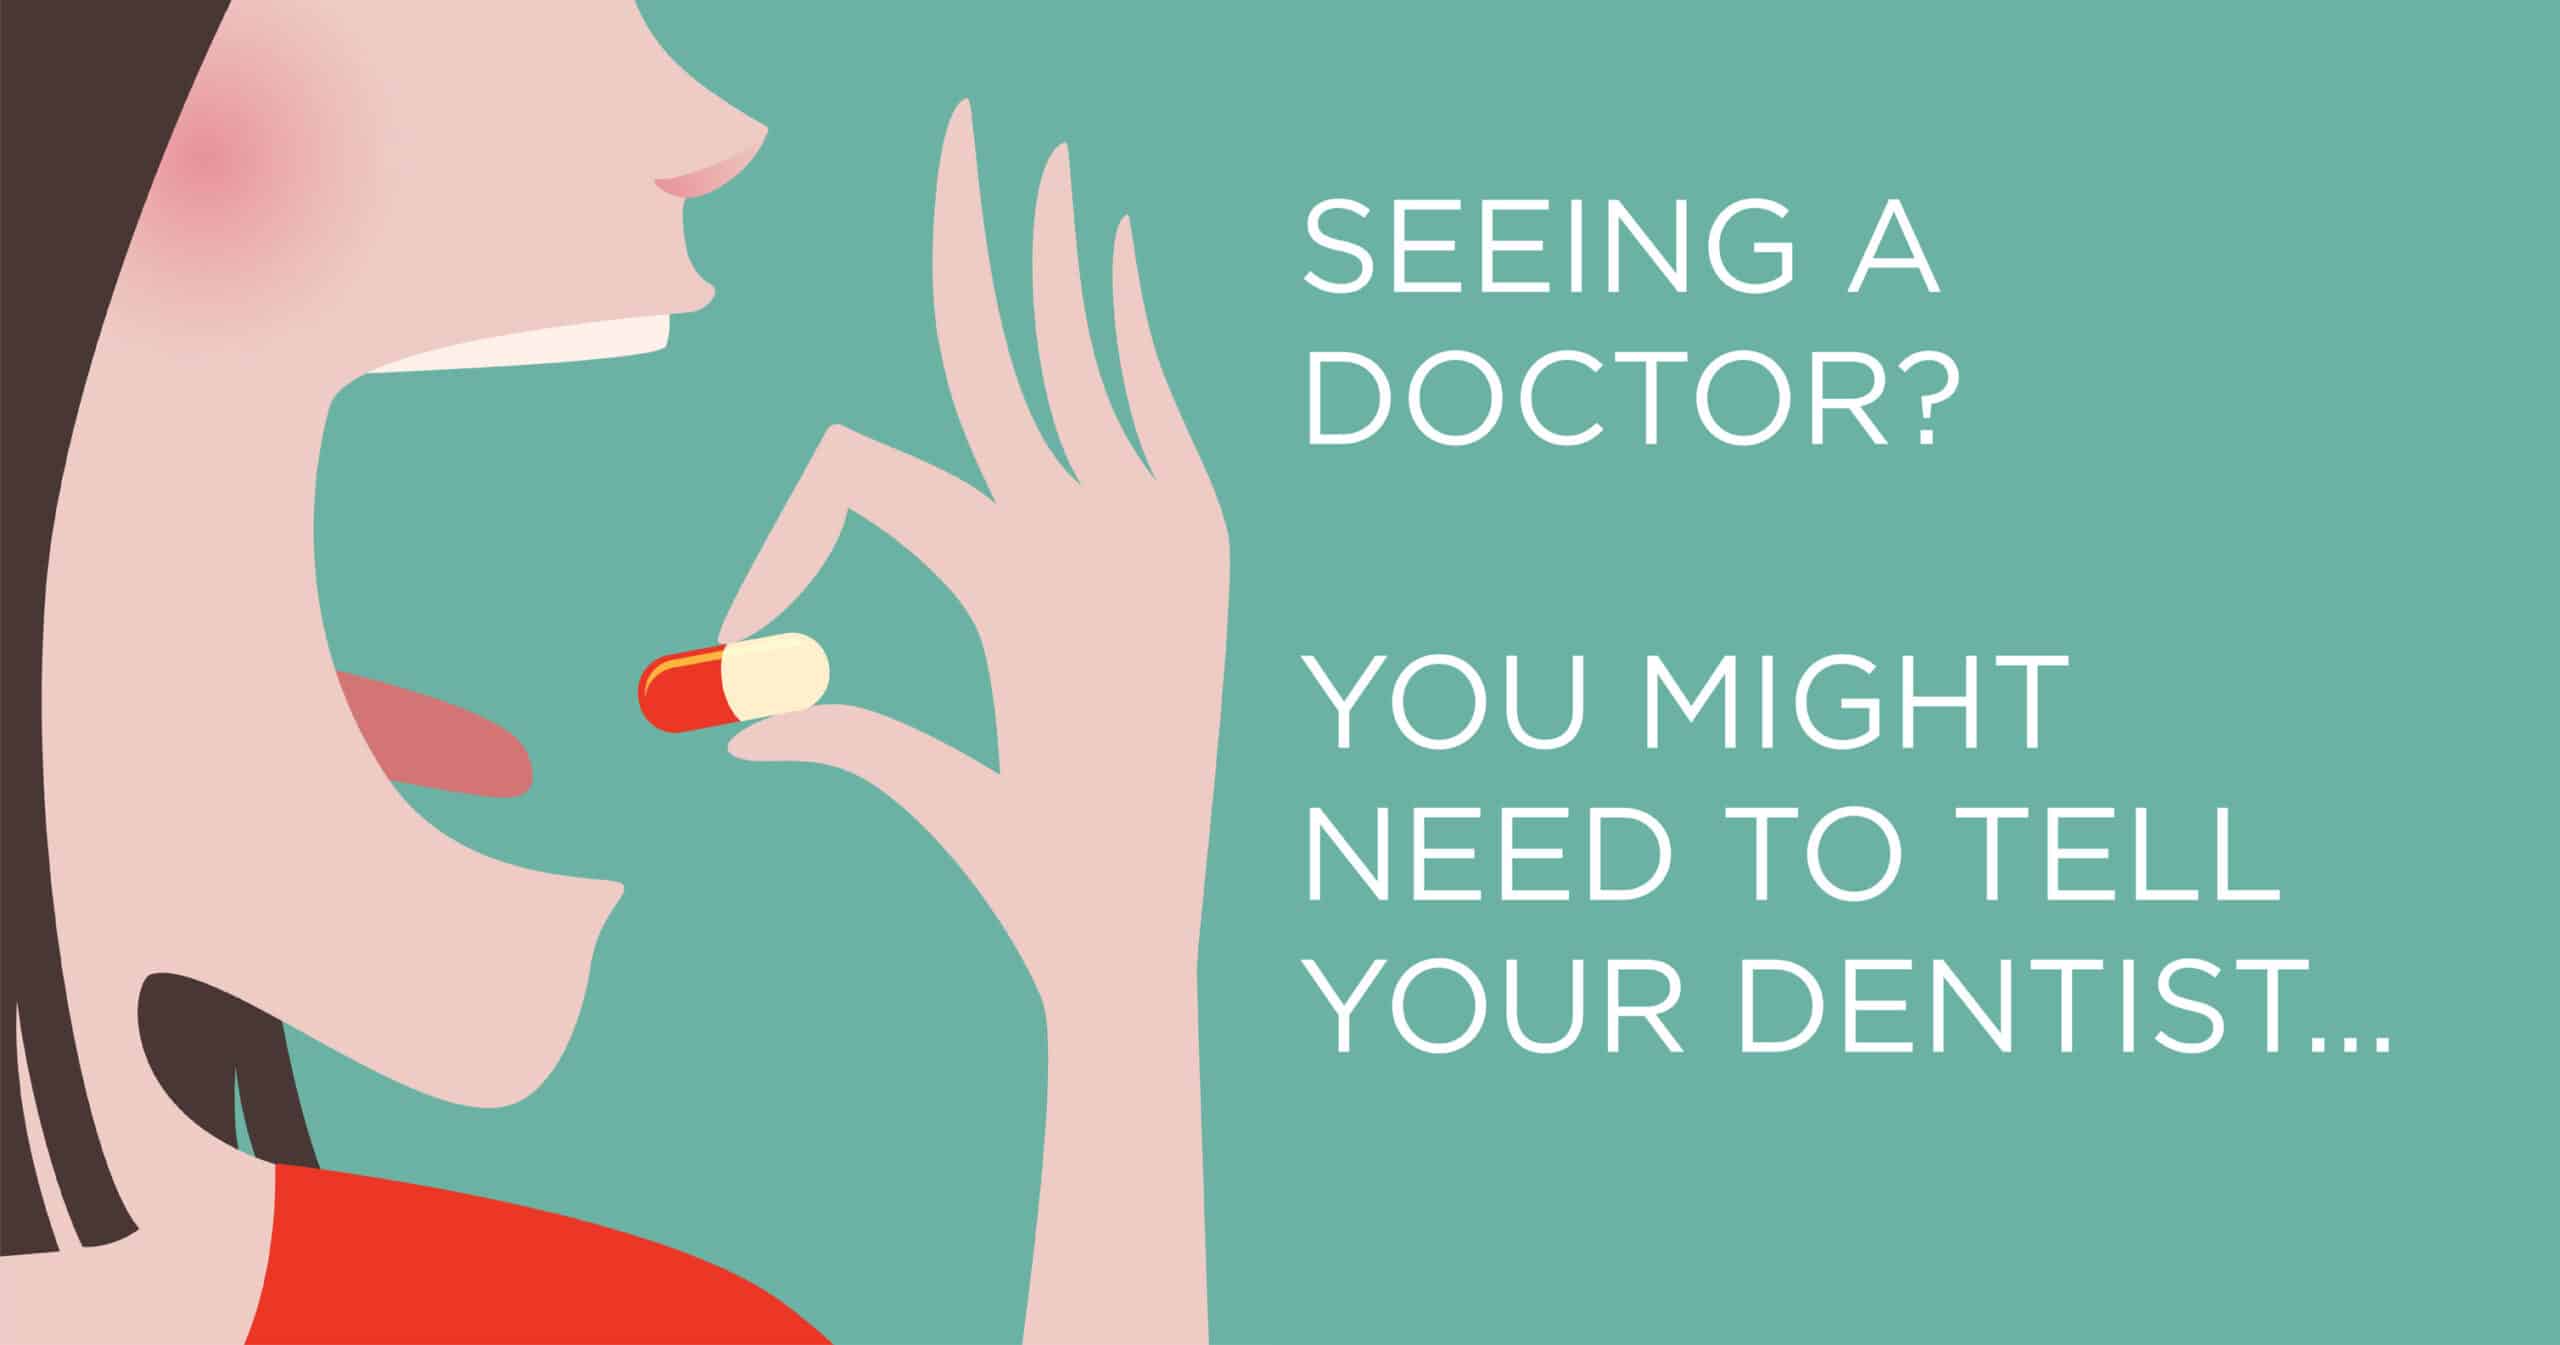 Seeing a doctor? You might need to tell your dentist...